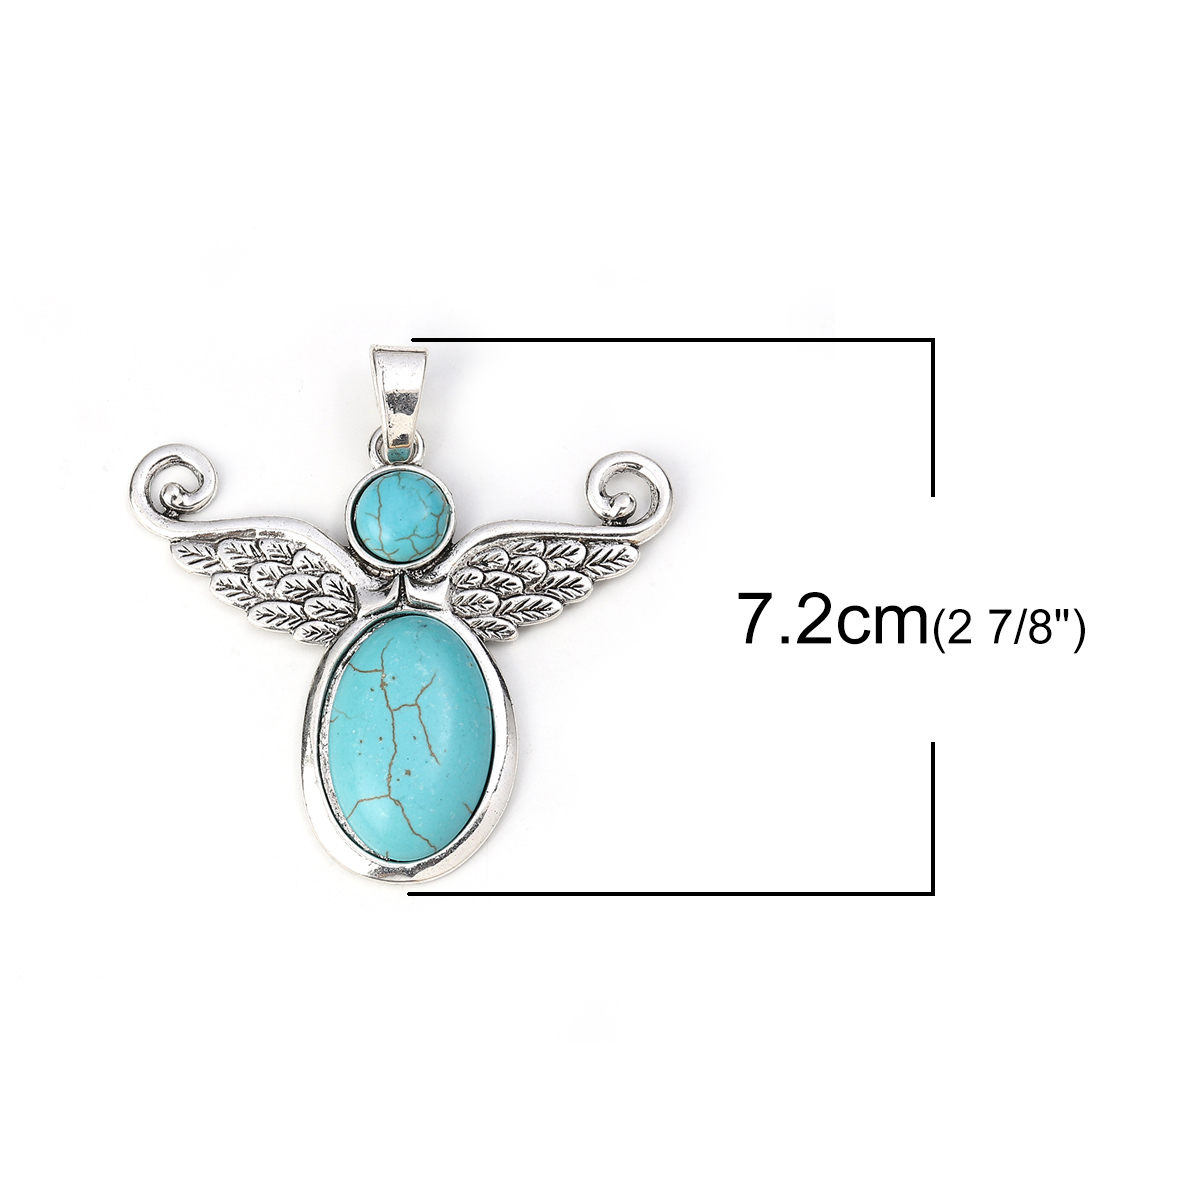 Picture of Zinc Based Alloy & Resin Boho Chic Pendants Angel Antique Silver Color Green Blue Oval Imitation Turquoise 72mm(2 7/8") x 70mm(2 6/8"), 2 PCs